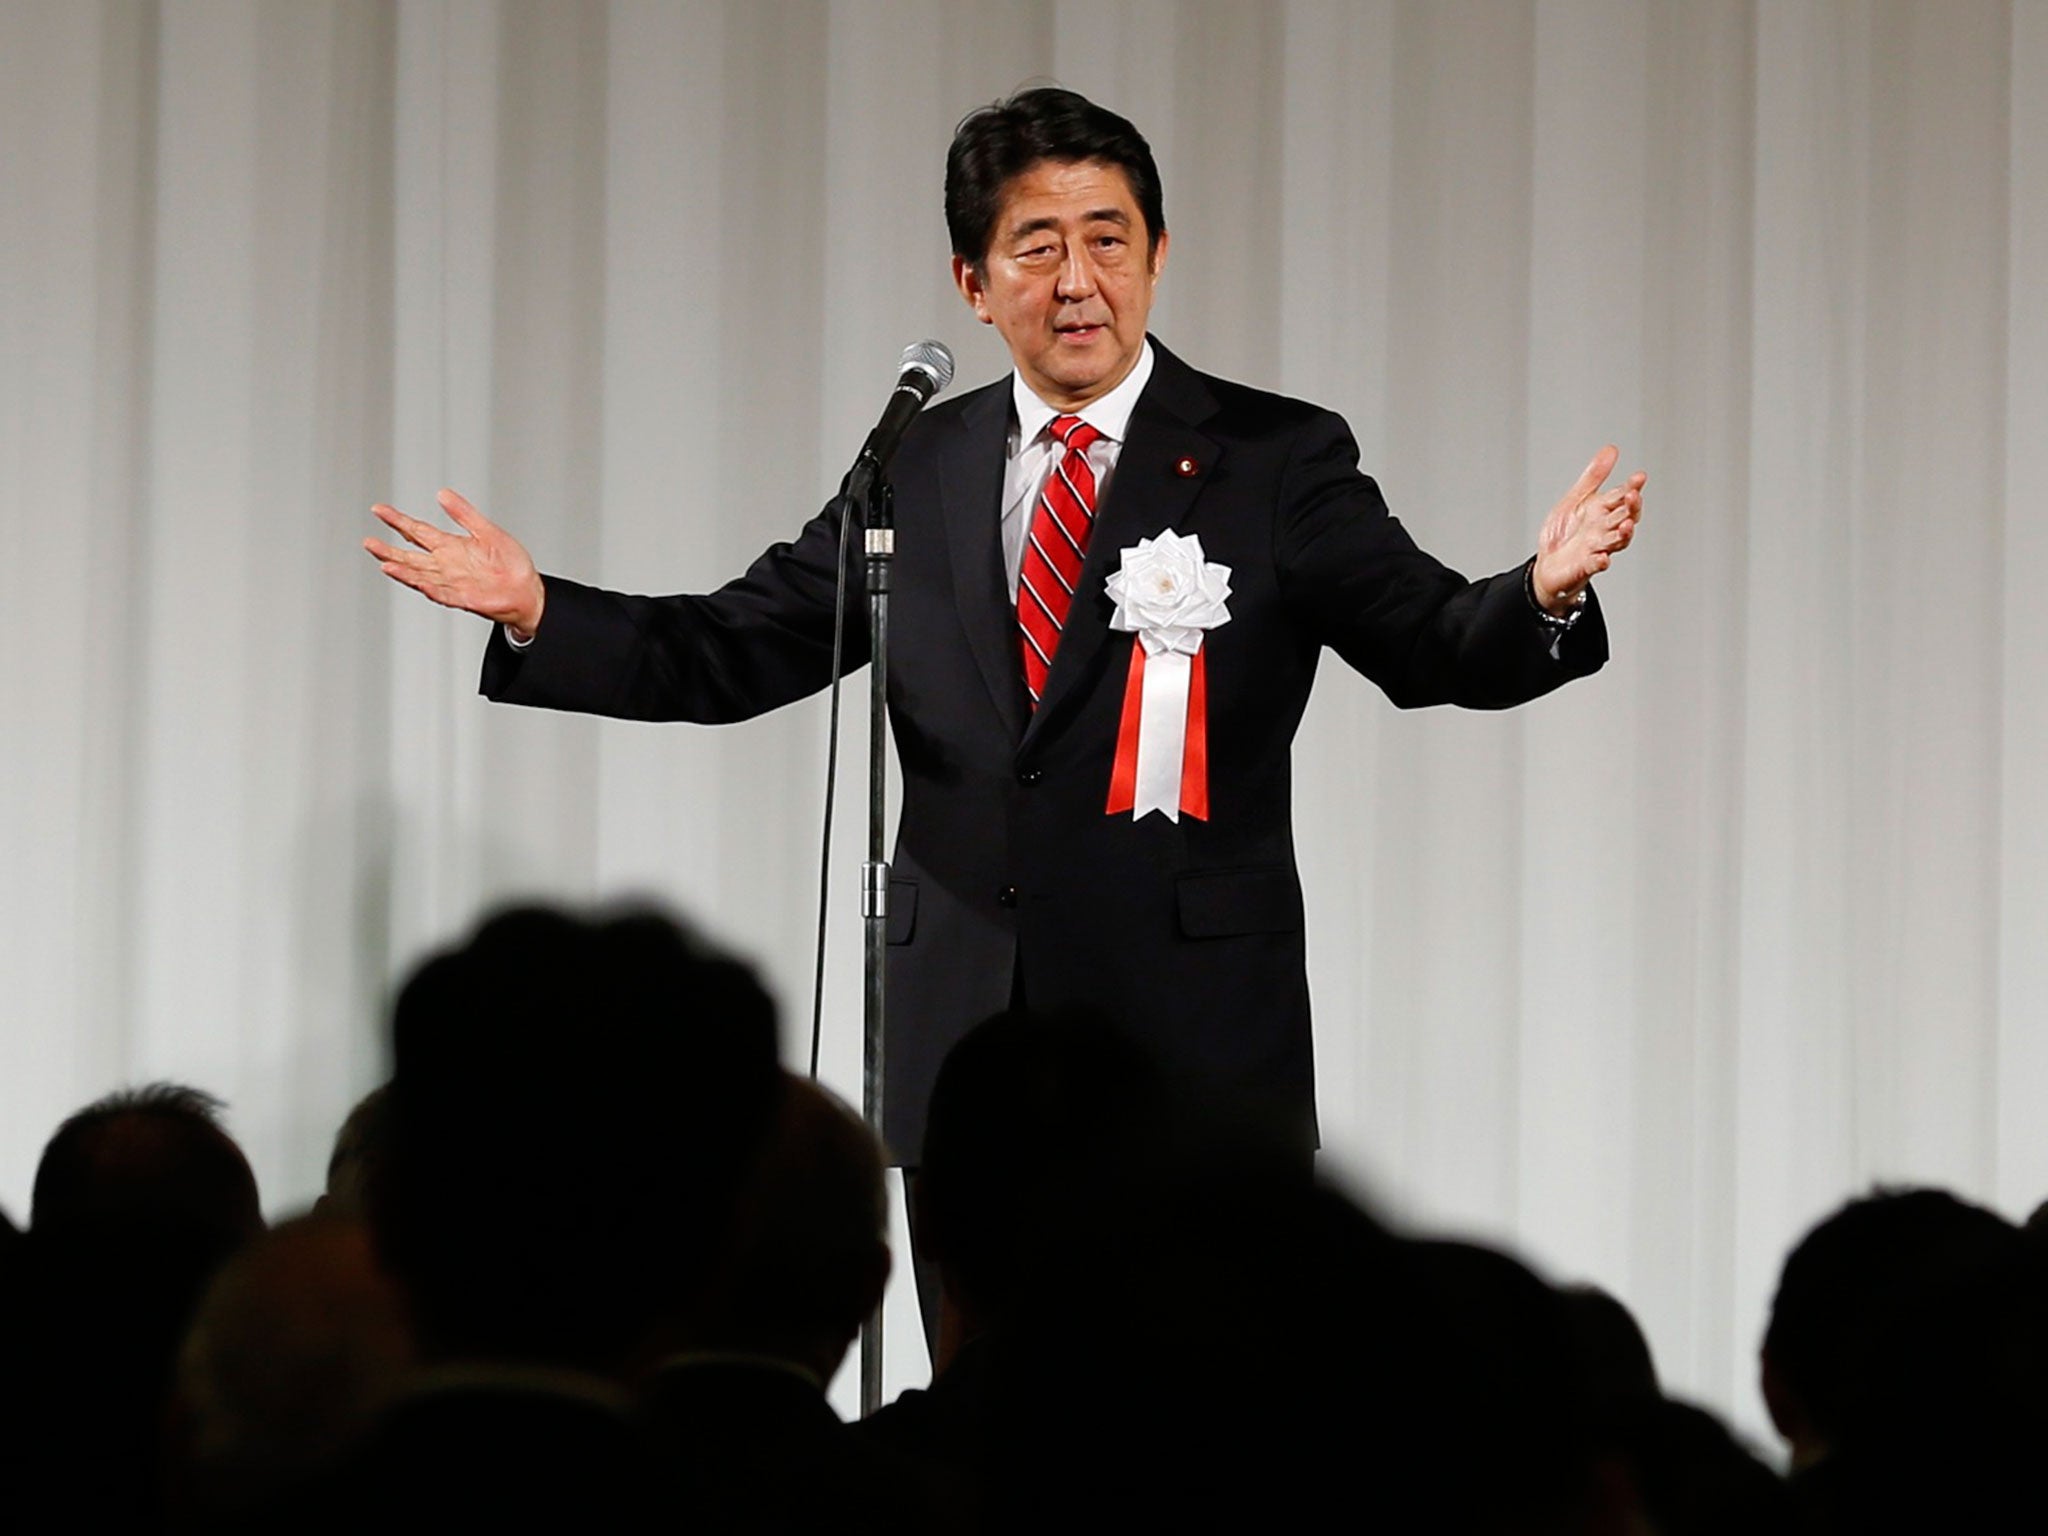 Blame for the return to recession has fallen on Shinzo Abe’s decision to hike sales tax